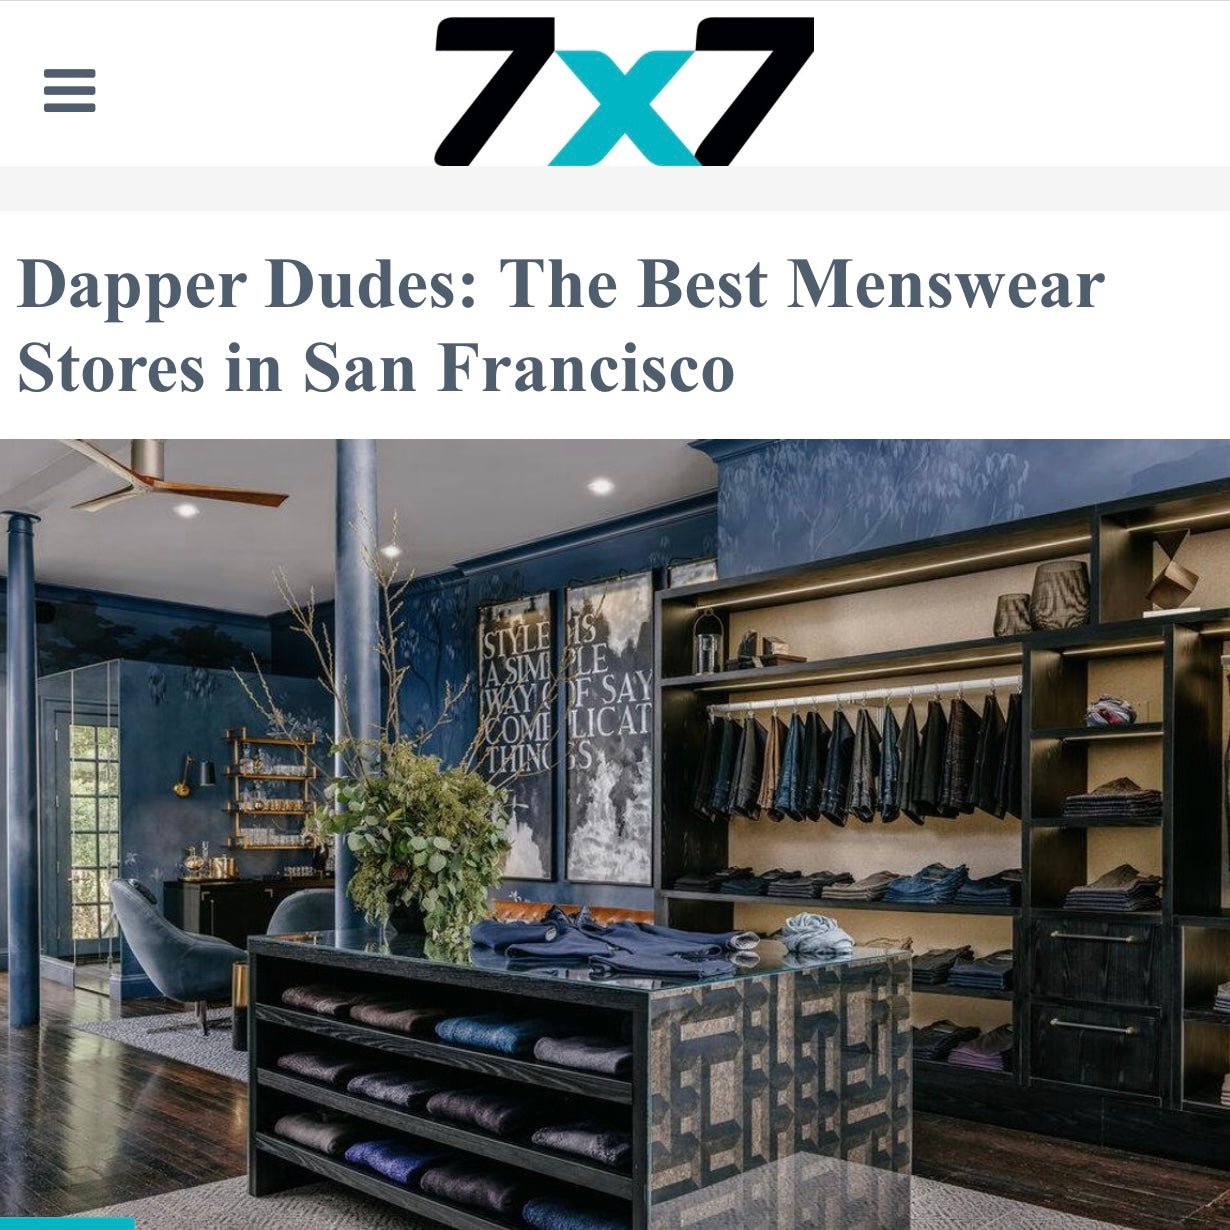 Our Shop was Mentioned Among SF's Best for Menswear!